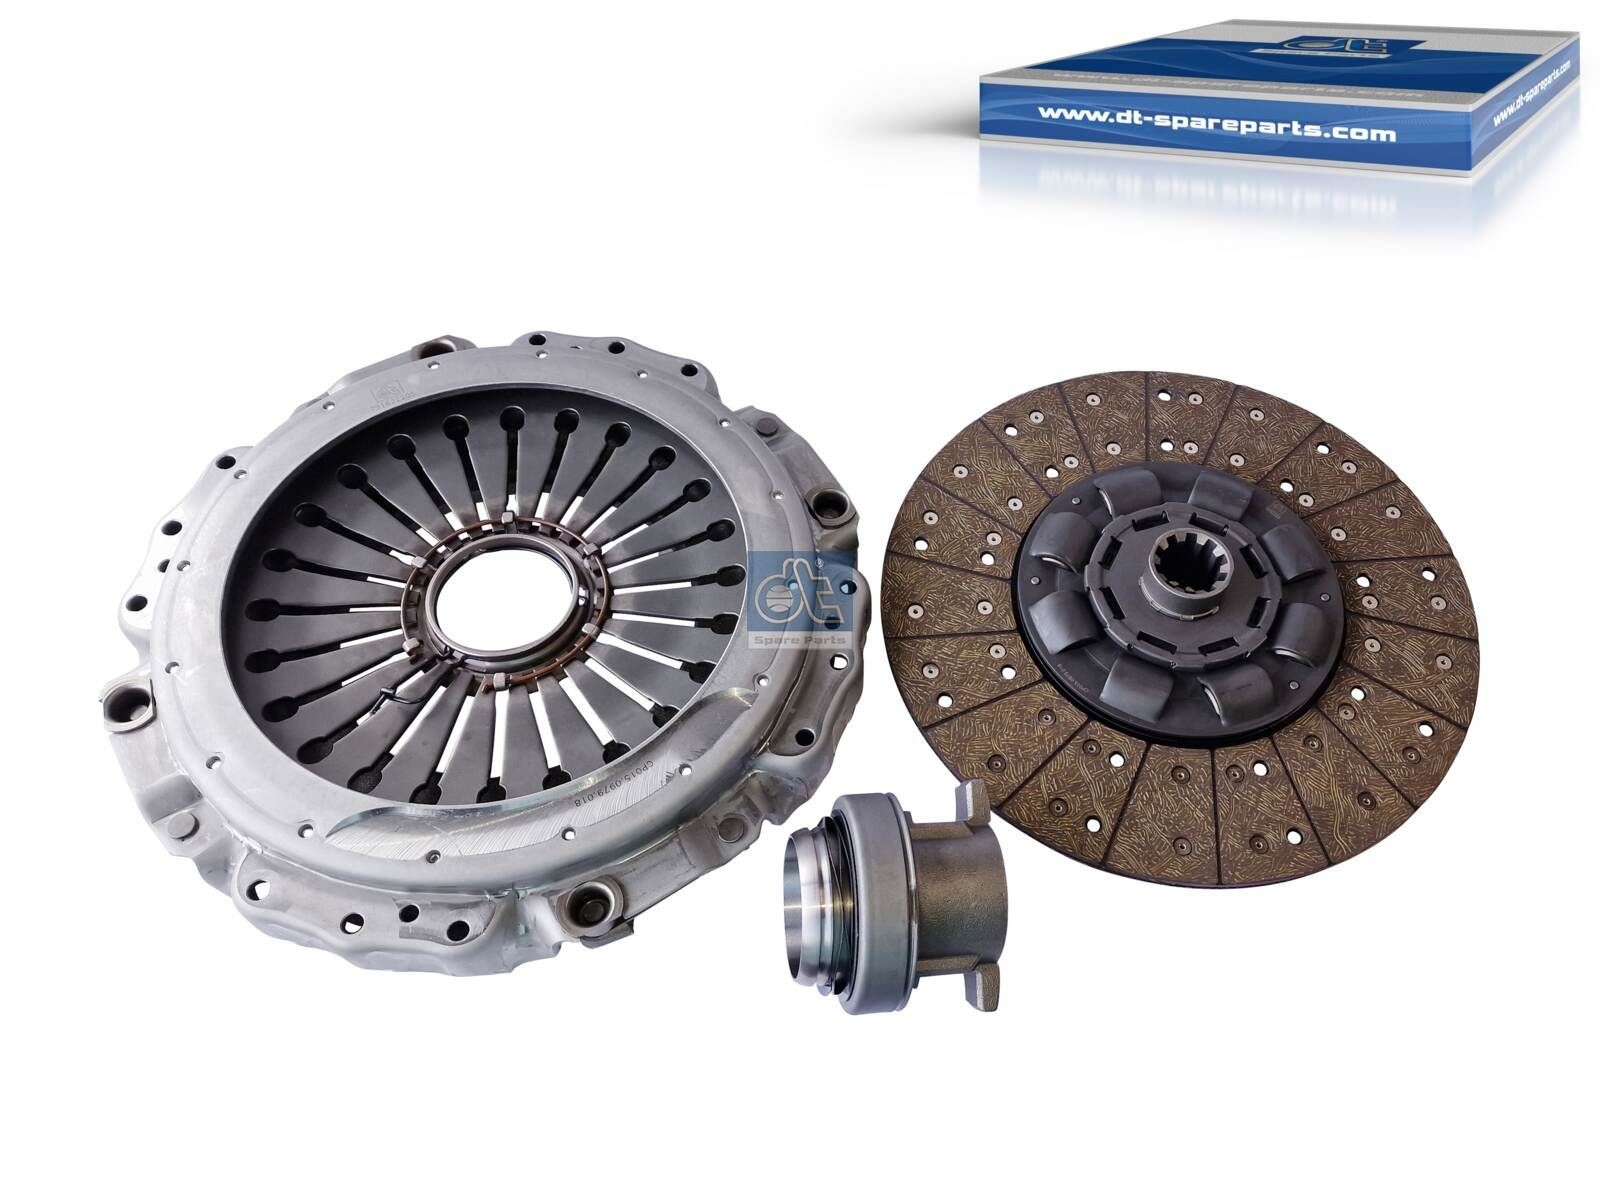 DT Spare Parts 430mm Ø: 430mm Clutch replacement kit 3.94018 buy